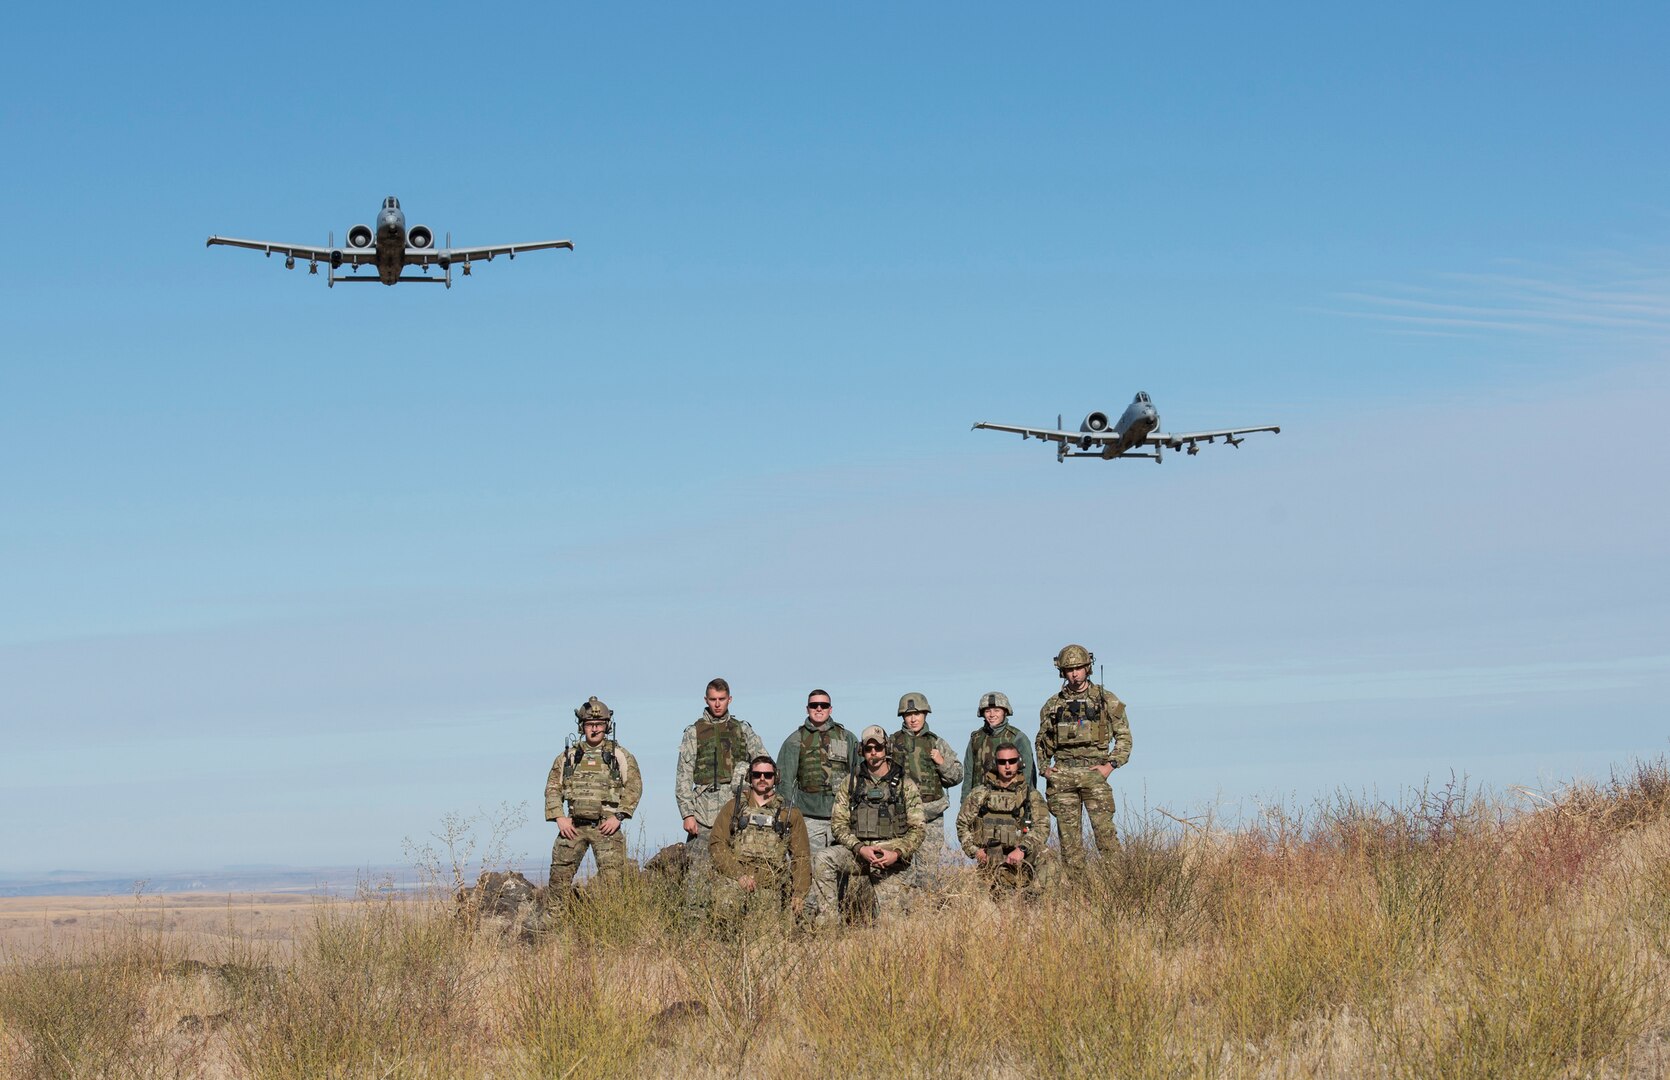 A pair of A-10 Thunderbolt IIs assigned to the 190th Fighter Squadron flies over a group of Airmen from the 124th Fighter Wing at the Saylor Creek Bombing Range, Idaho, Oct. 5, 2019. The range provides a designated area for pilots, Tactical Air Control Party Airmen and other mission-essential groups to run training missions.